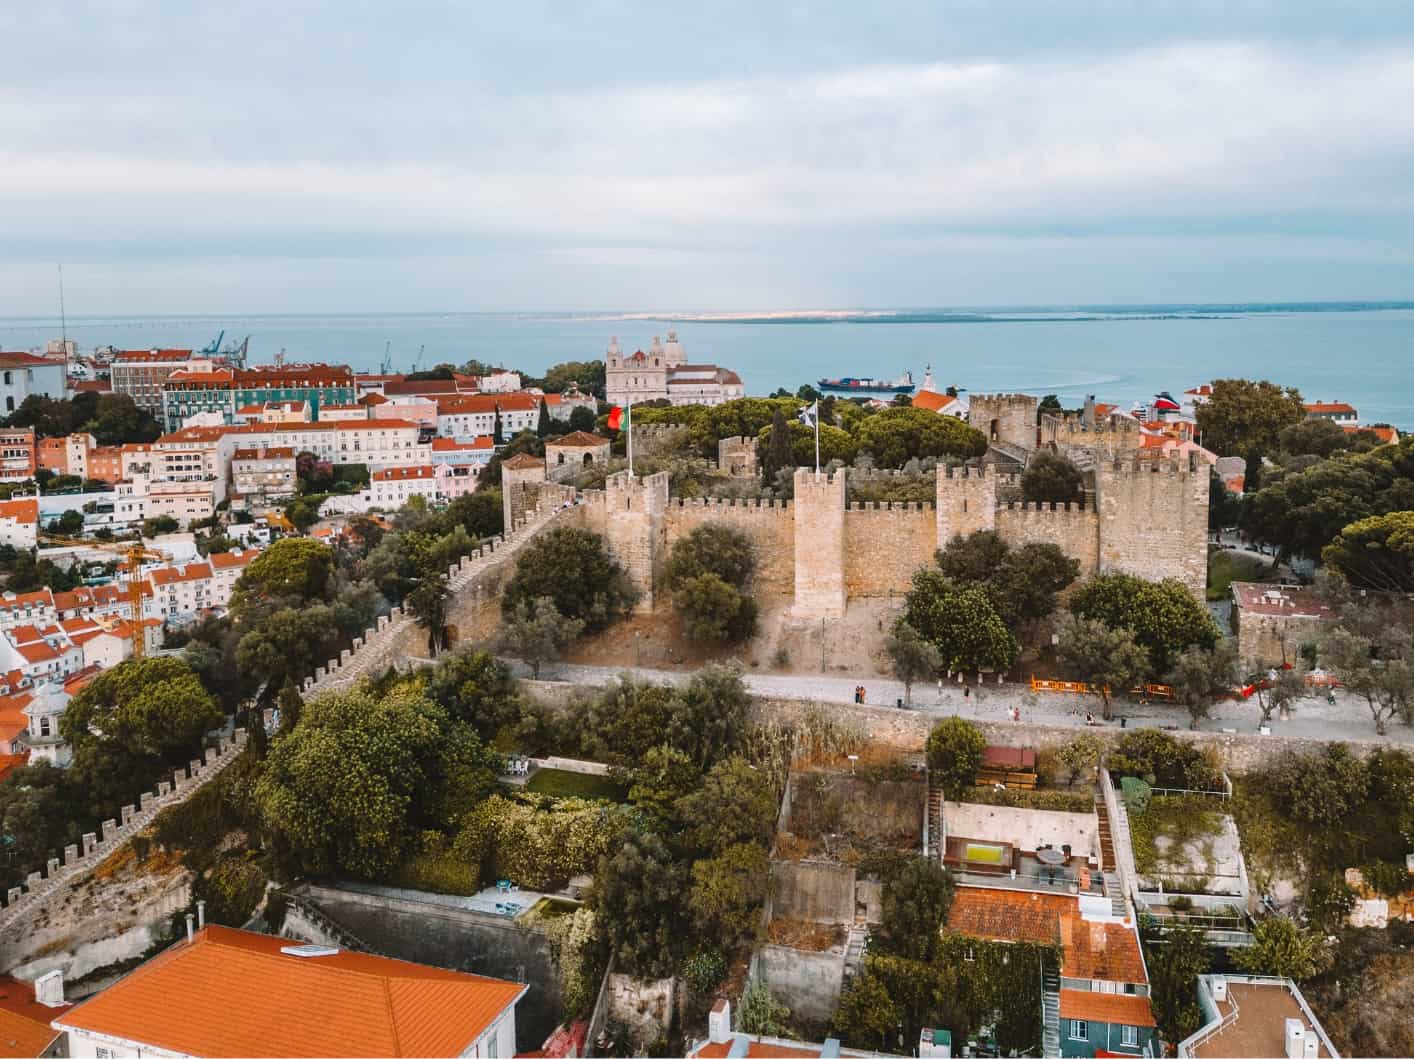 The Castelo de São Jorge from the air. Visiting this castle is a must on any 5 days in Lisbon itinerary. 